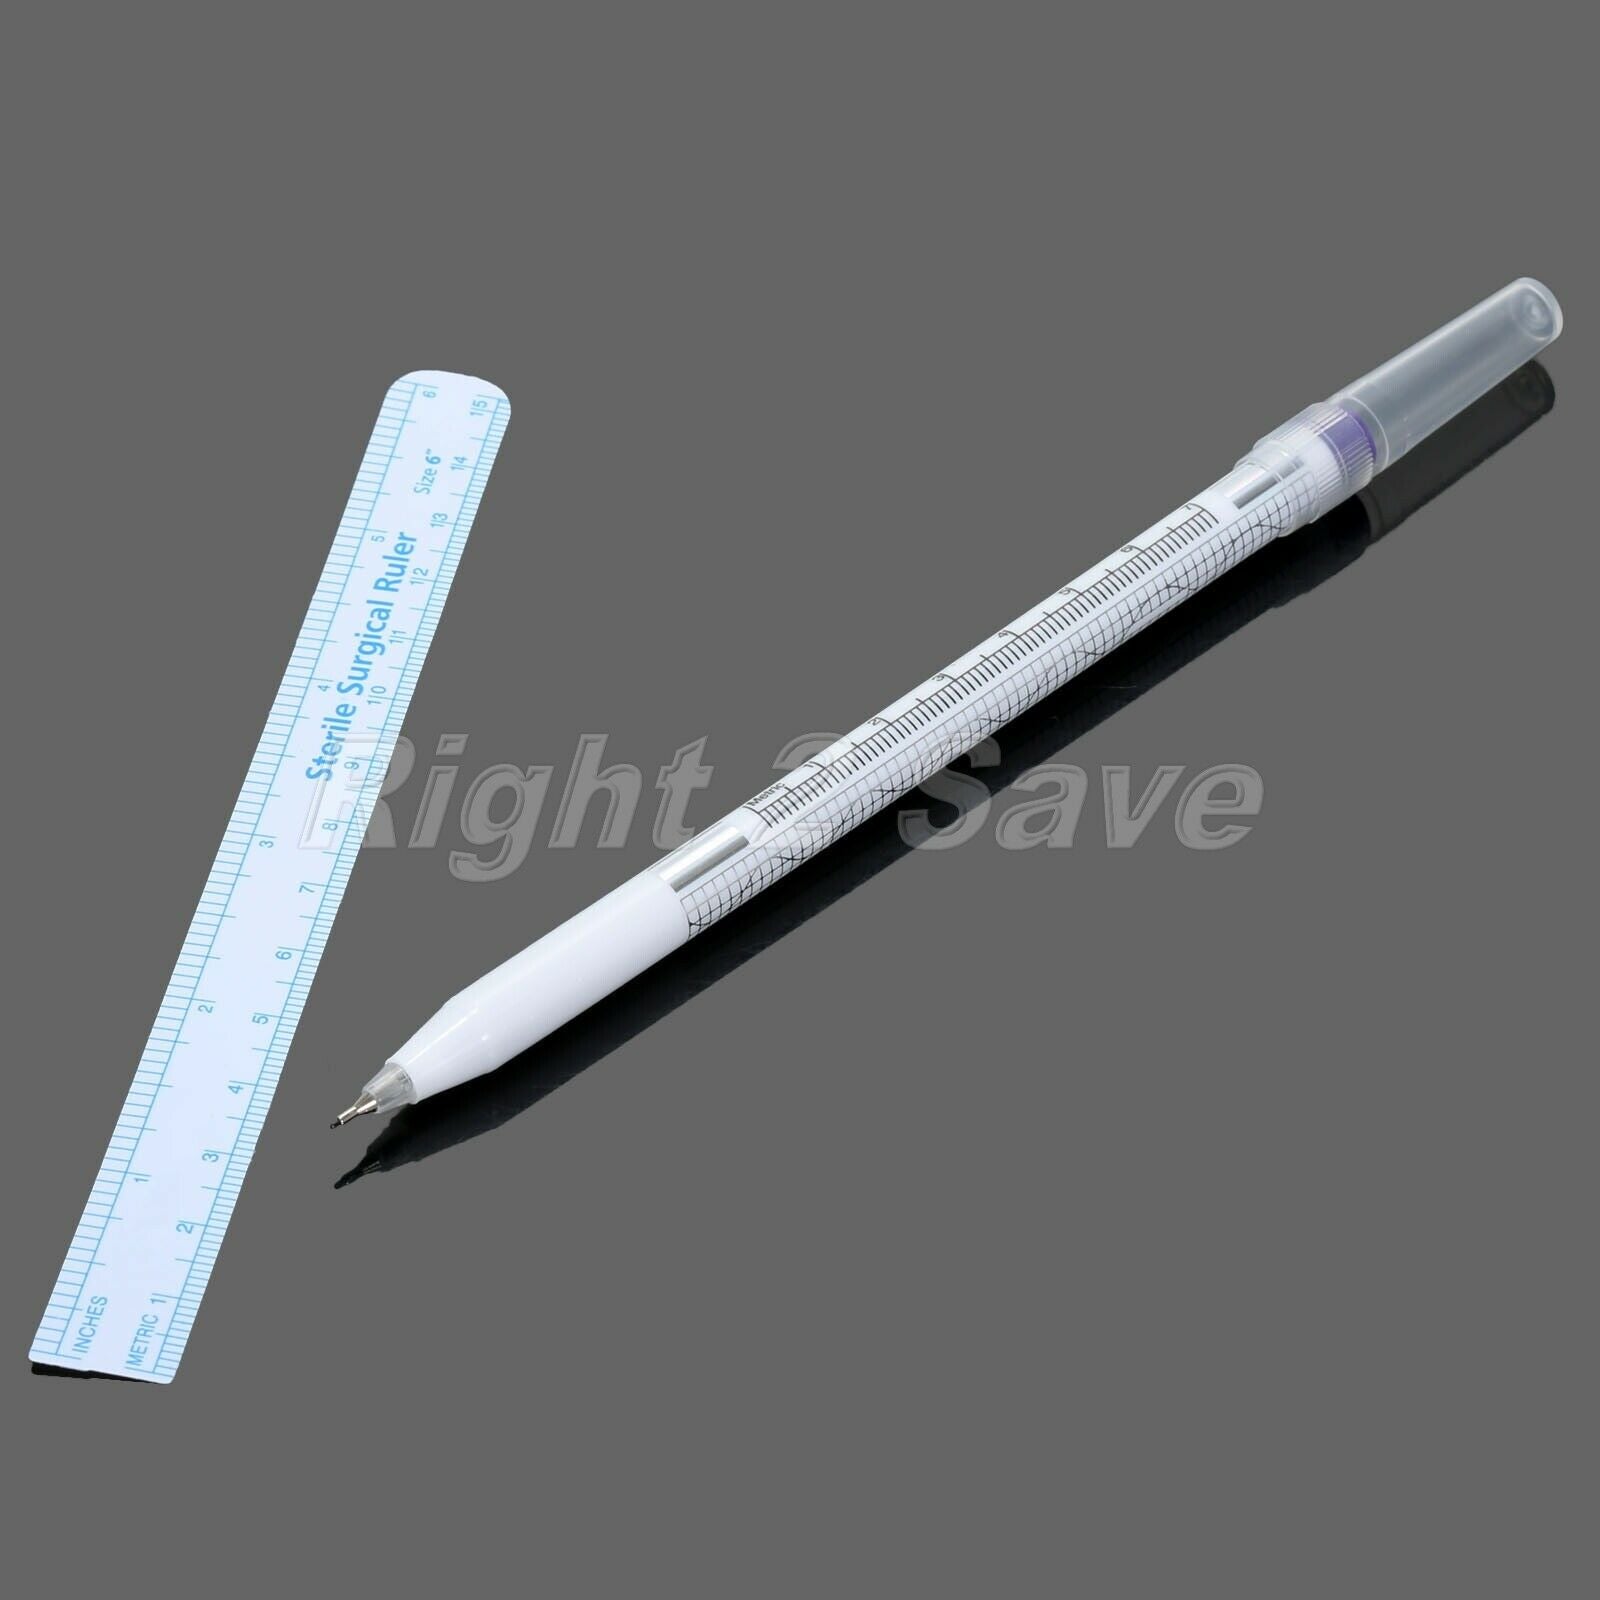 1/5Set Surgical Skin Marker Pen+Ruler For Tattoo Stencil Body Piercing Accessory